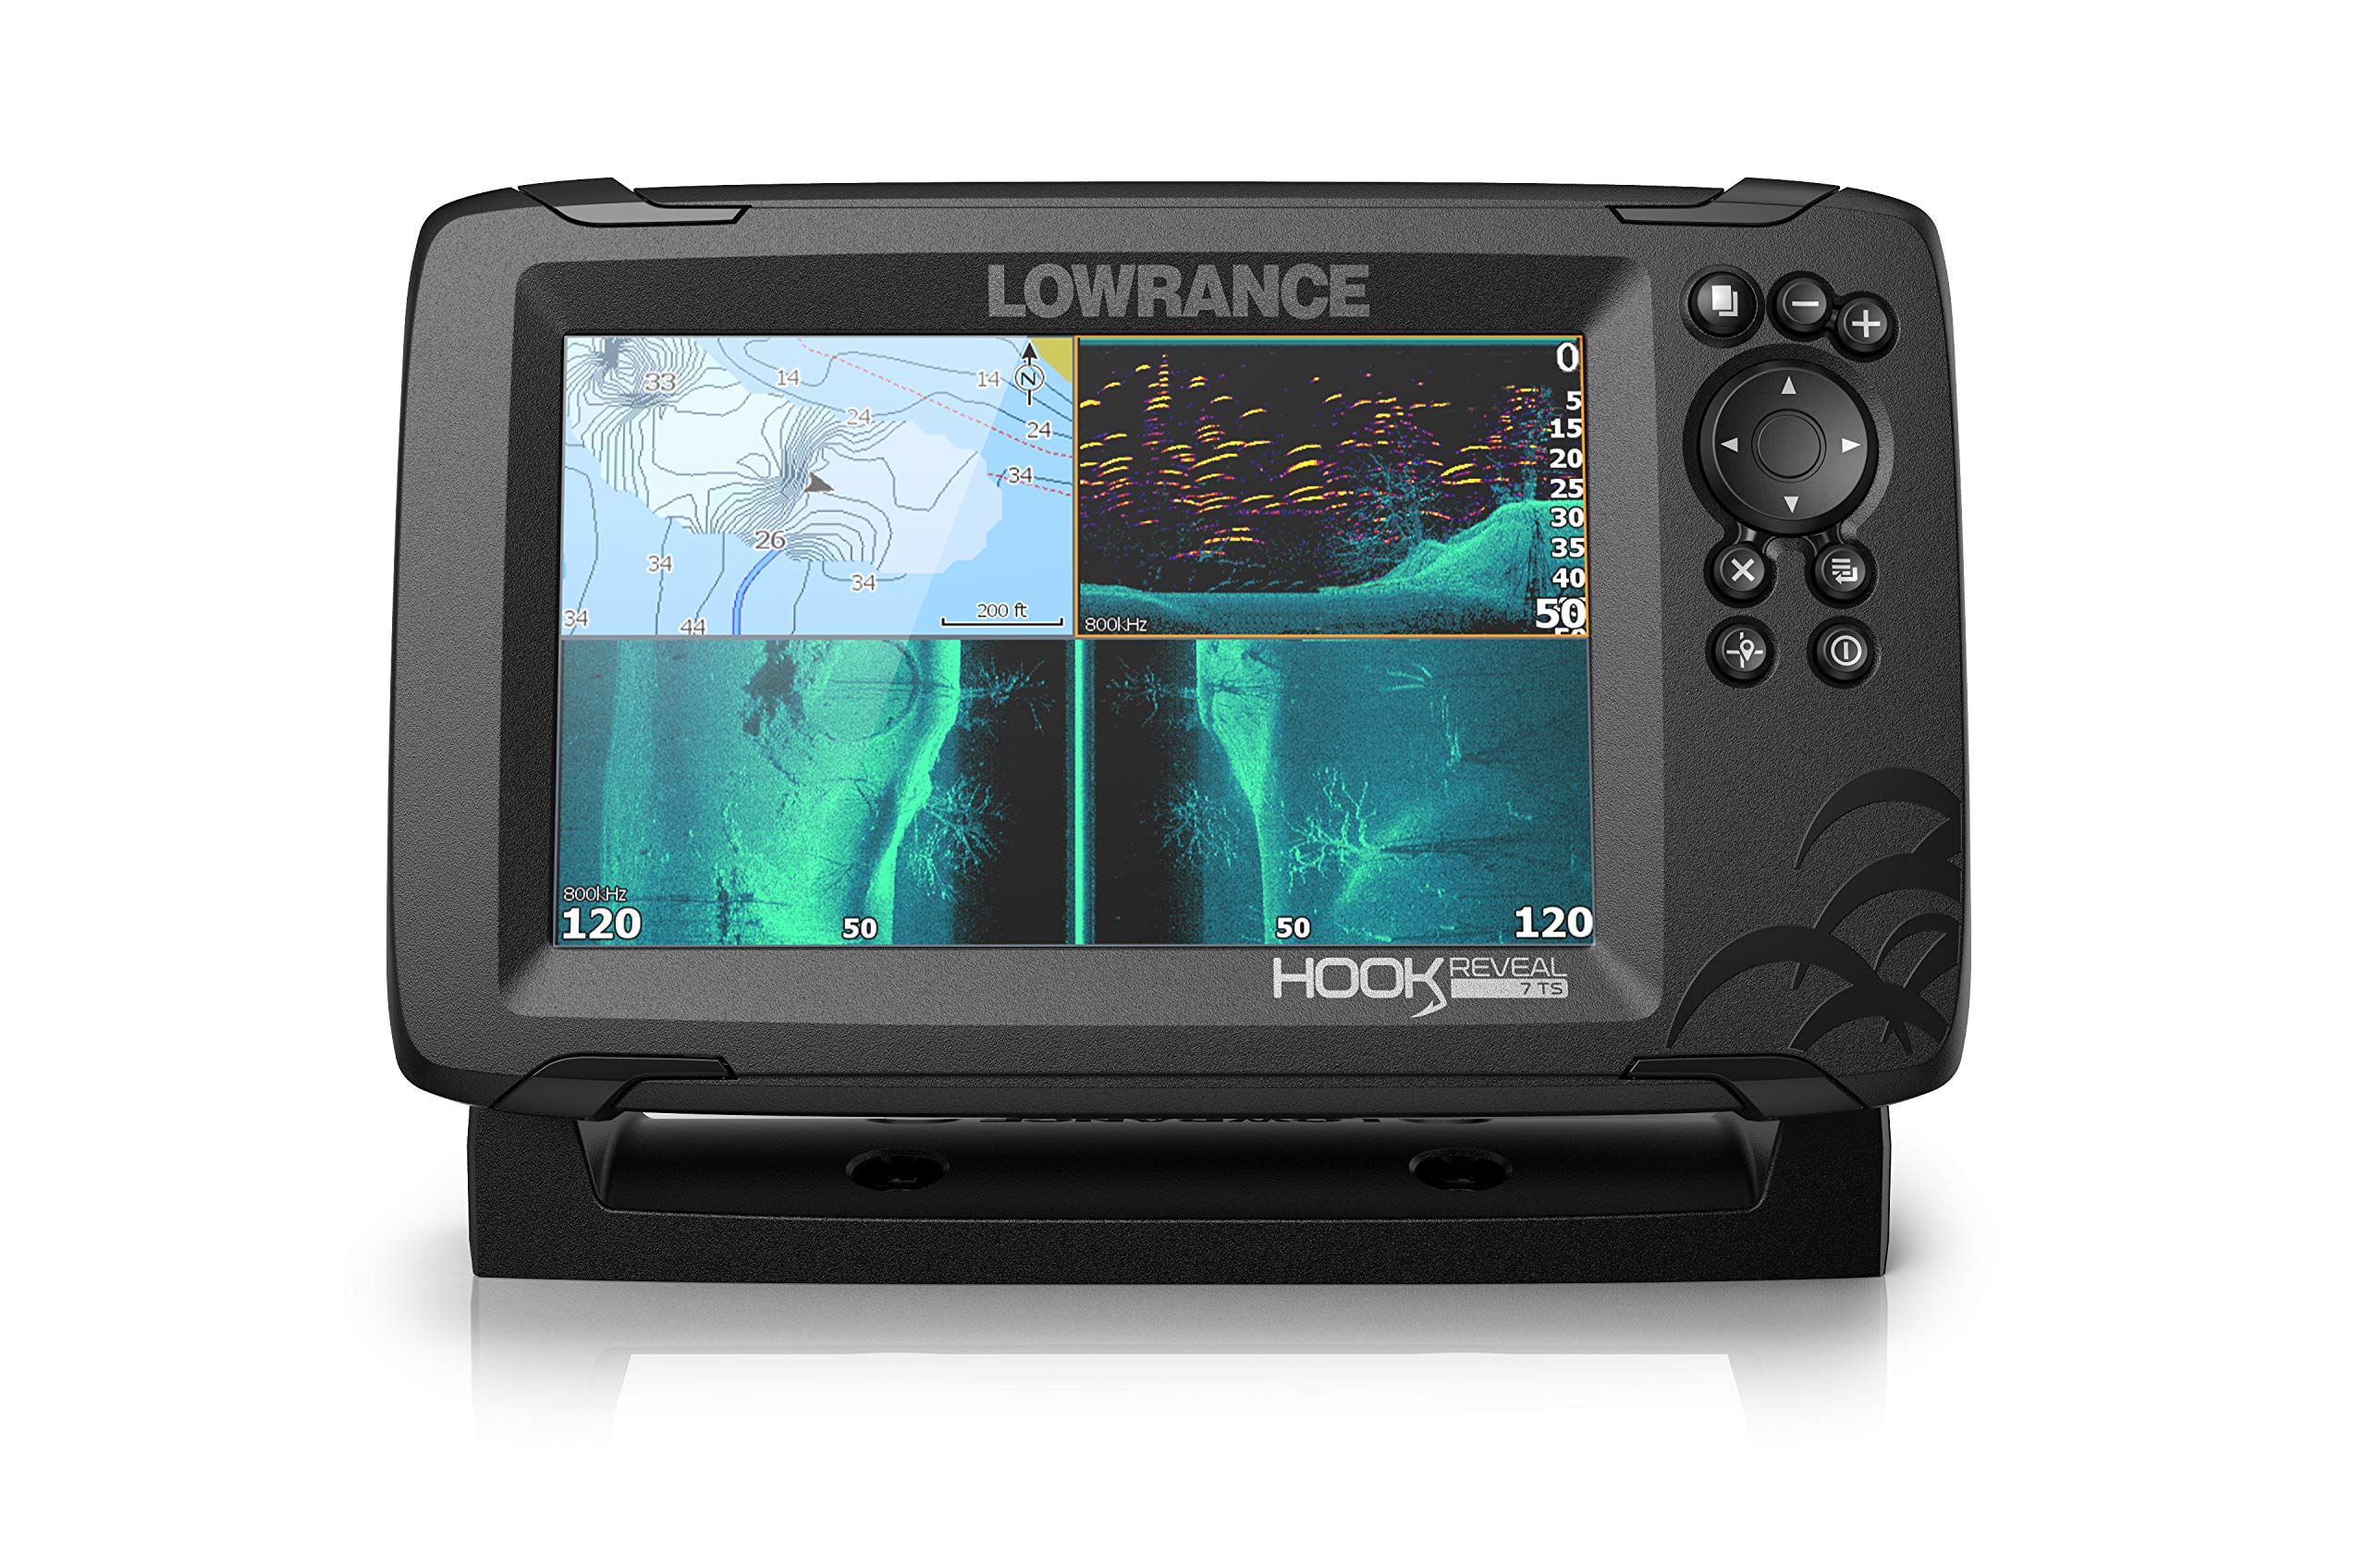 Lowrance Hook Reveal 7 Inch Fish Finders with Transducer, Plus